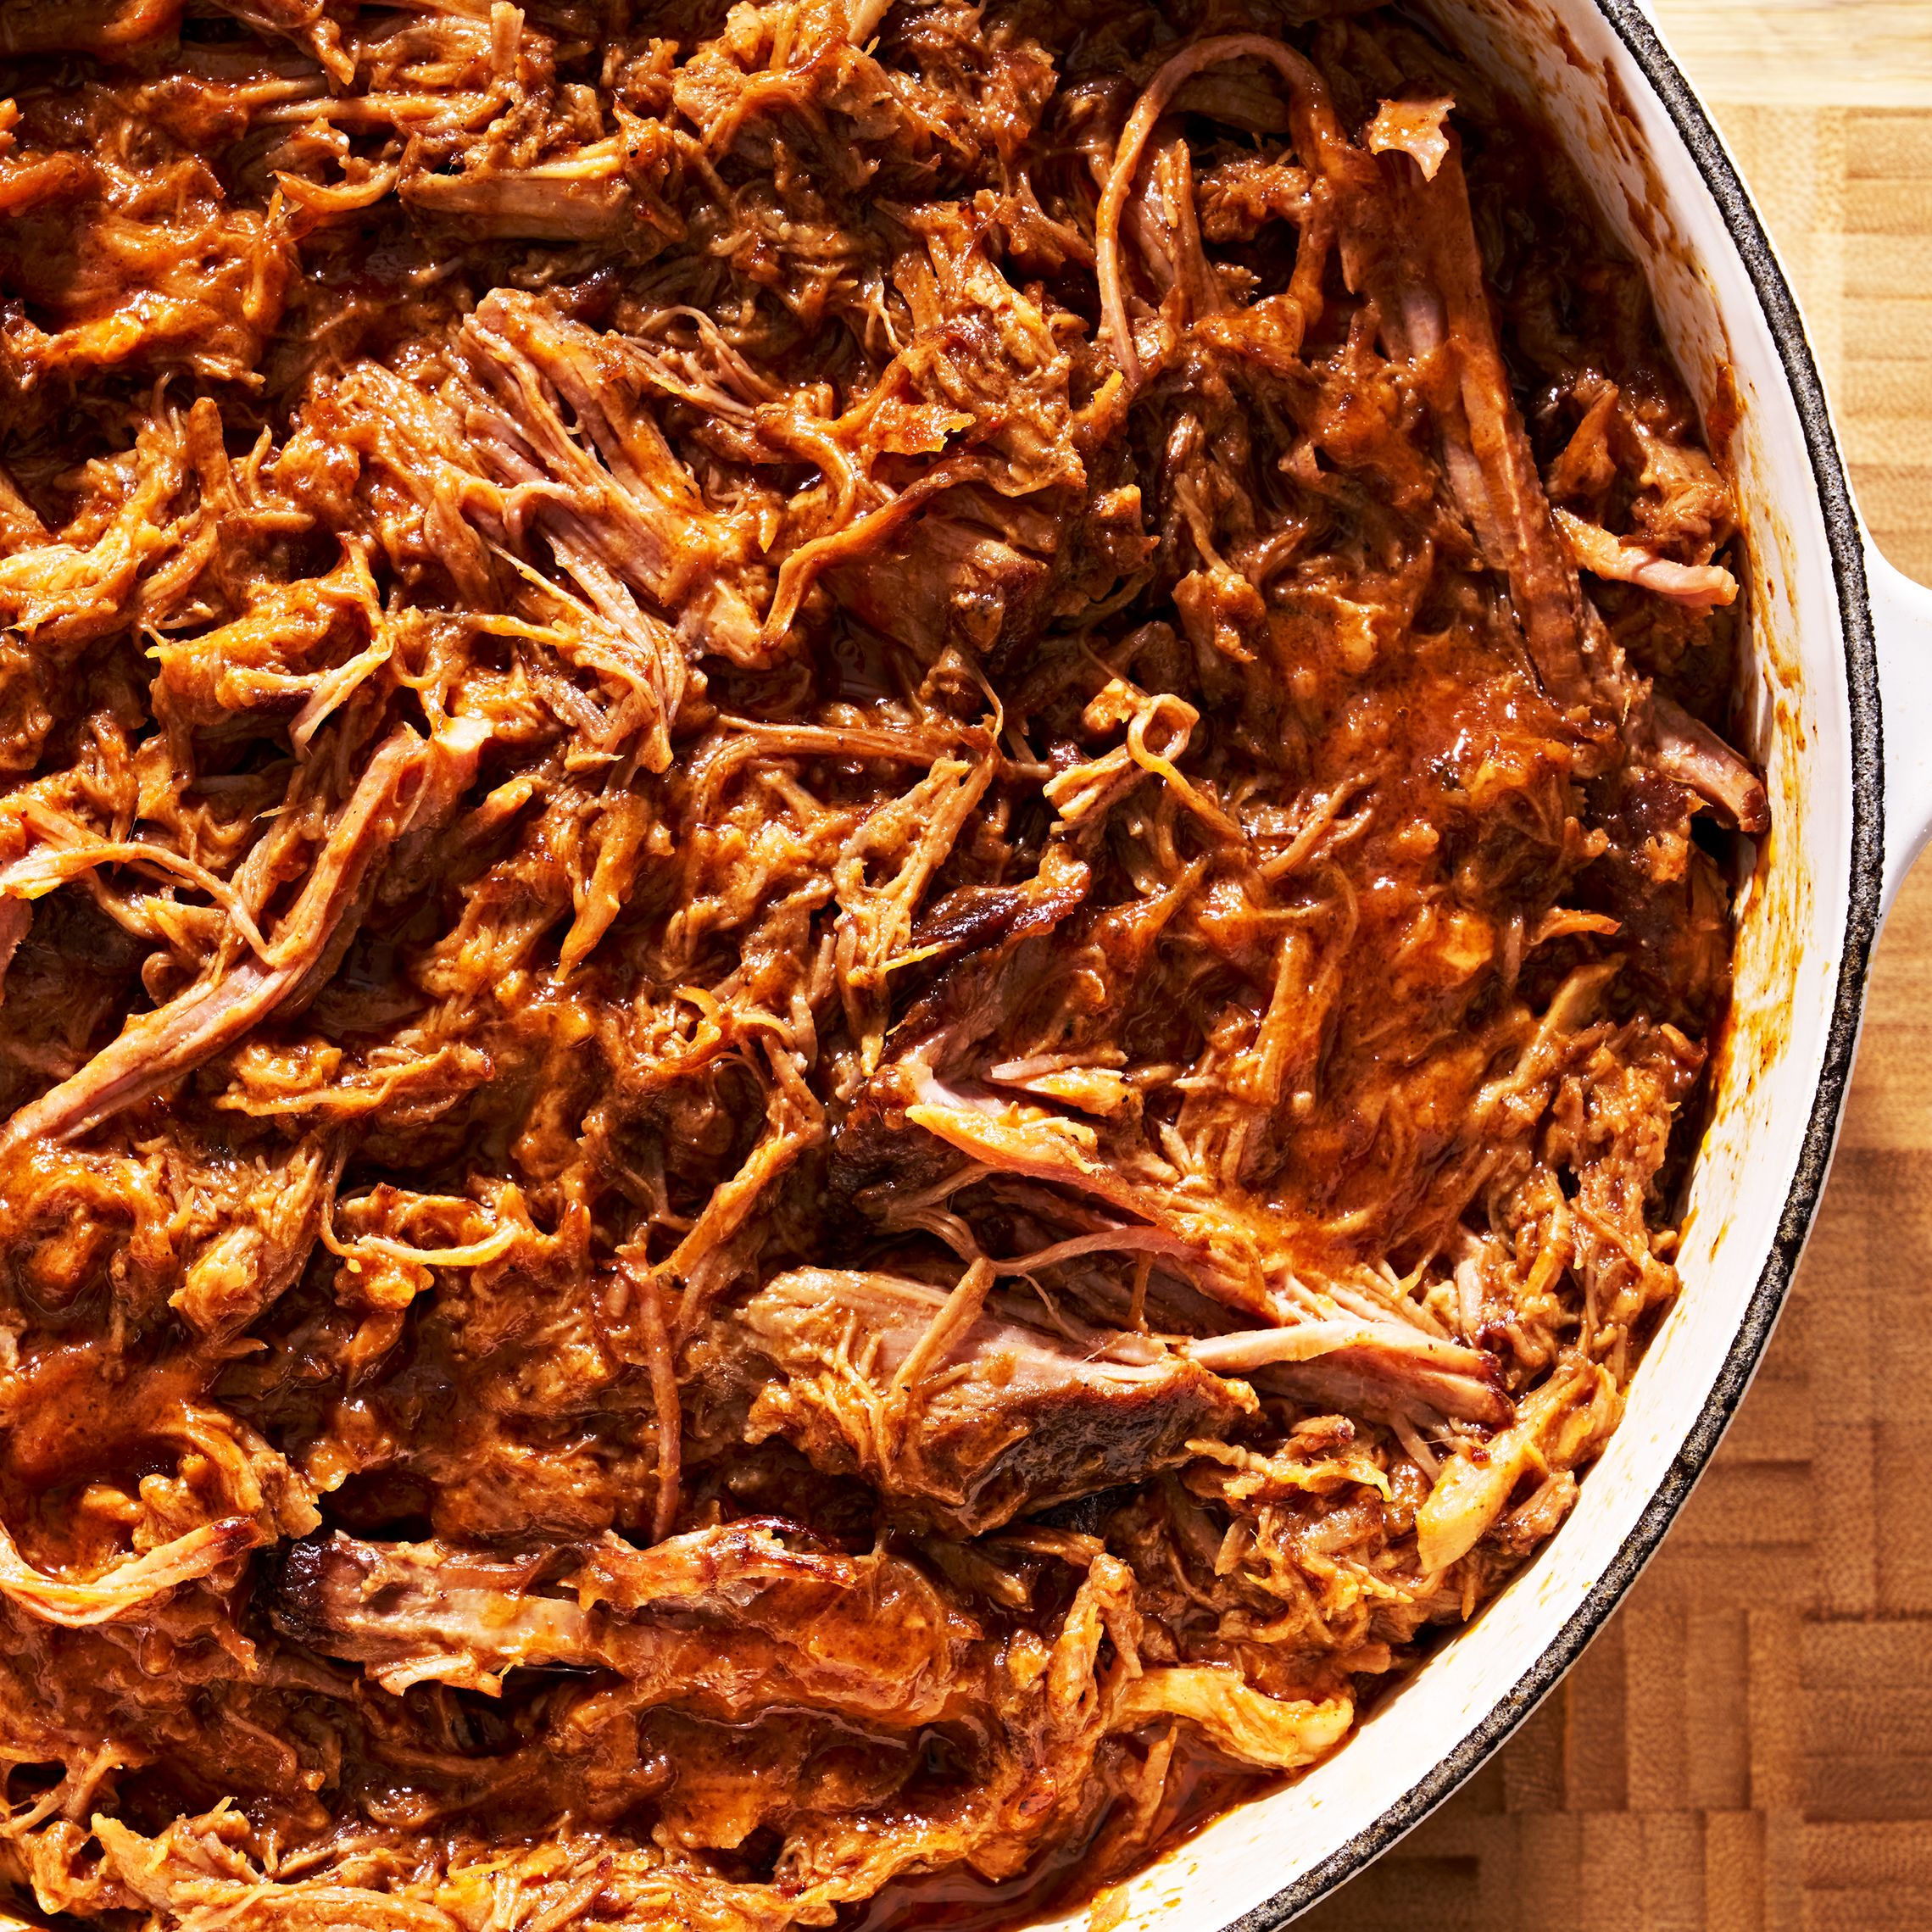 Pulled pork made in the RV oven - easy campground recipe